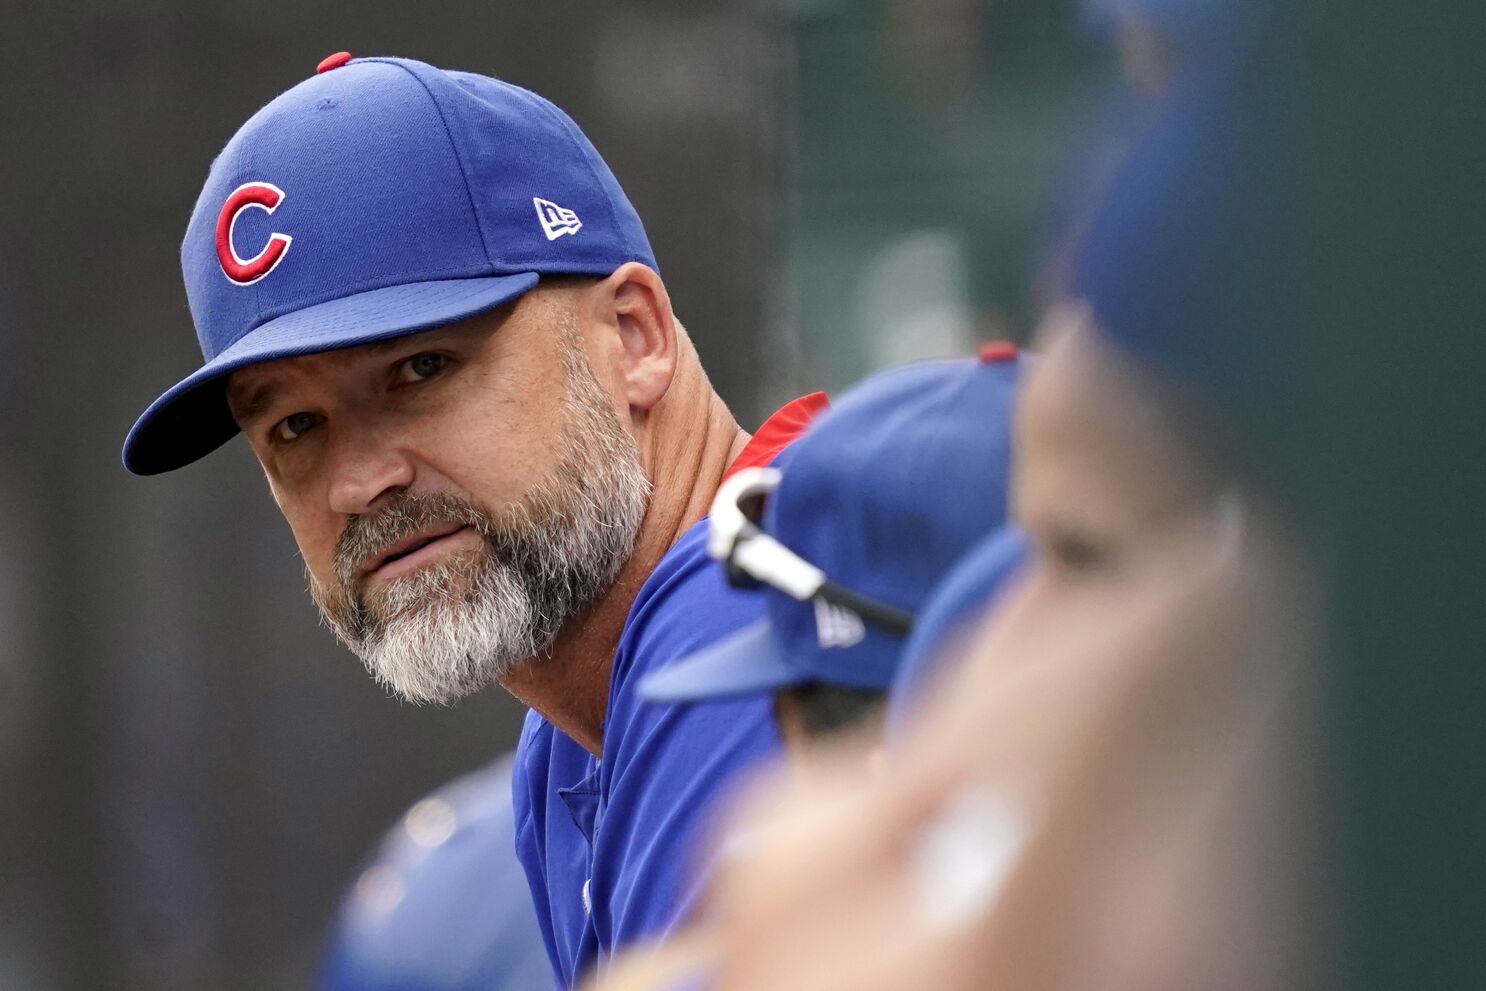 He's our guy': Cubs back David Ross as manager - CHGO